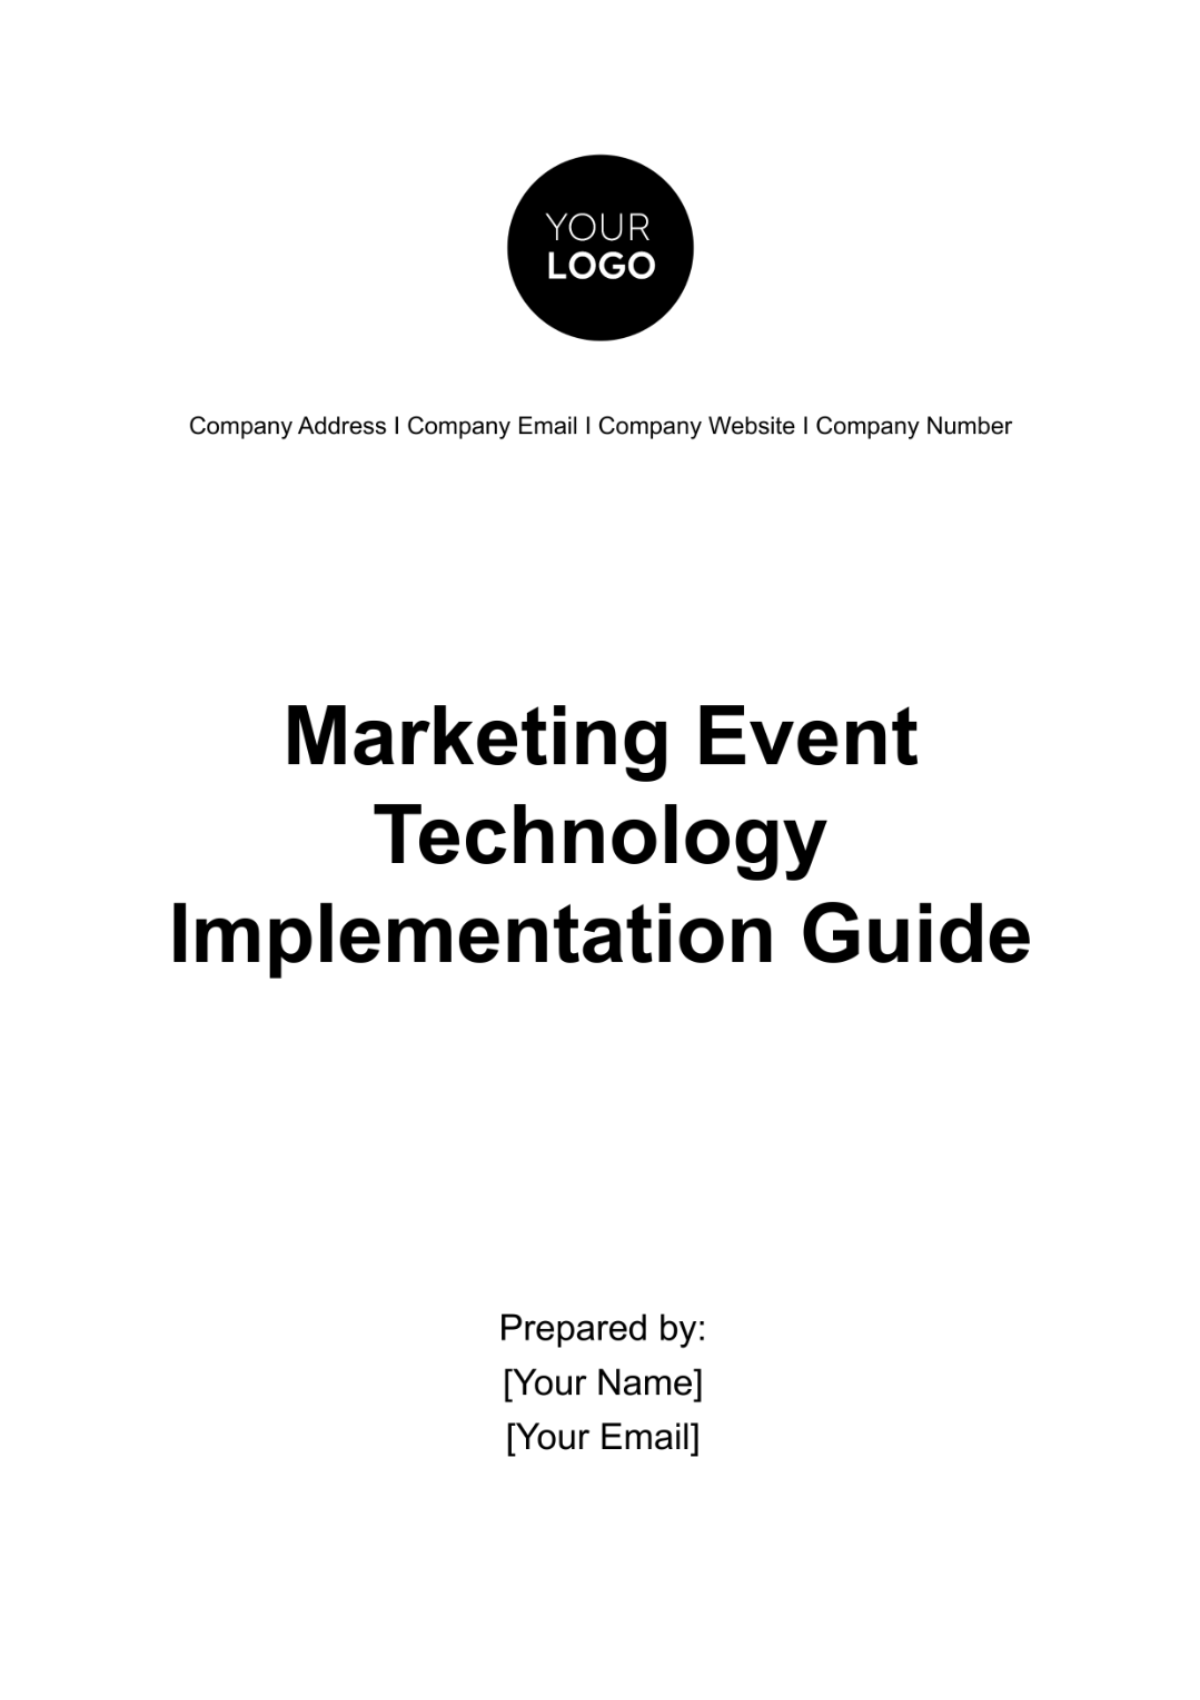 Marketing Event Technology Implementation Guide Template